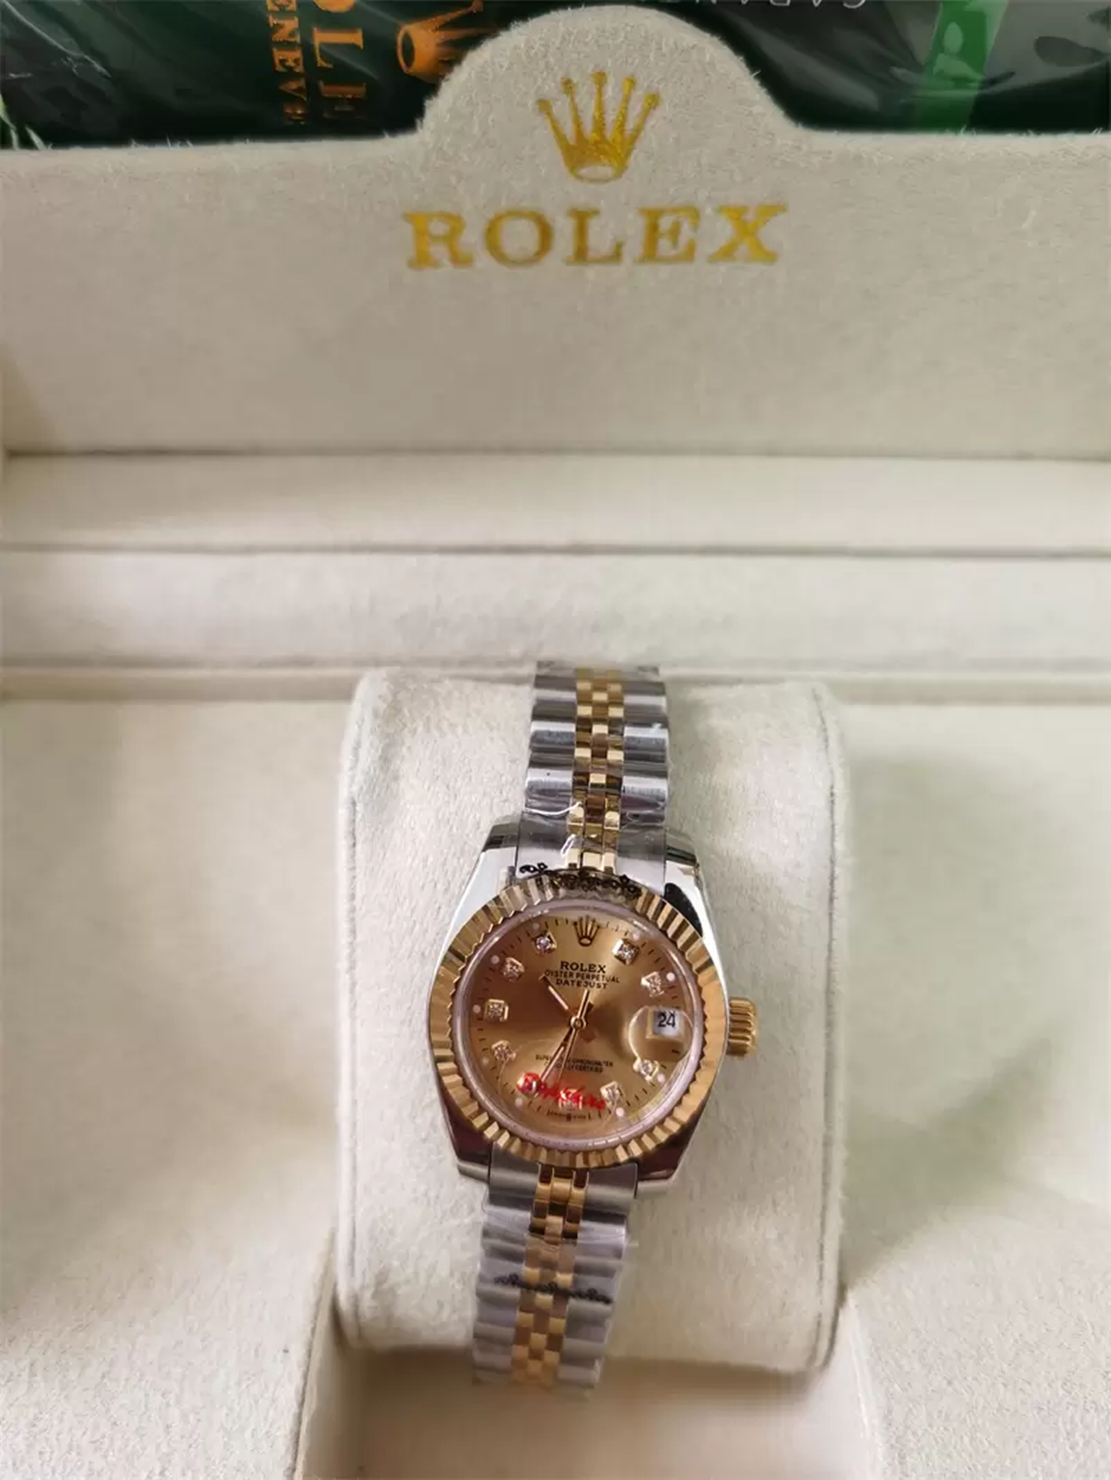 

With original box 26mm 31mm 36mm 41mm Woman Mans watch Datejust 116233 Date President 18K gold Diamond Dial Asia 2813 Movement Mechanical Automatic Man's Watches 2850, Style 1 original box + watch 41mm